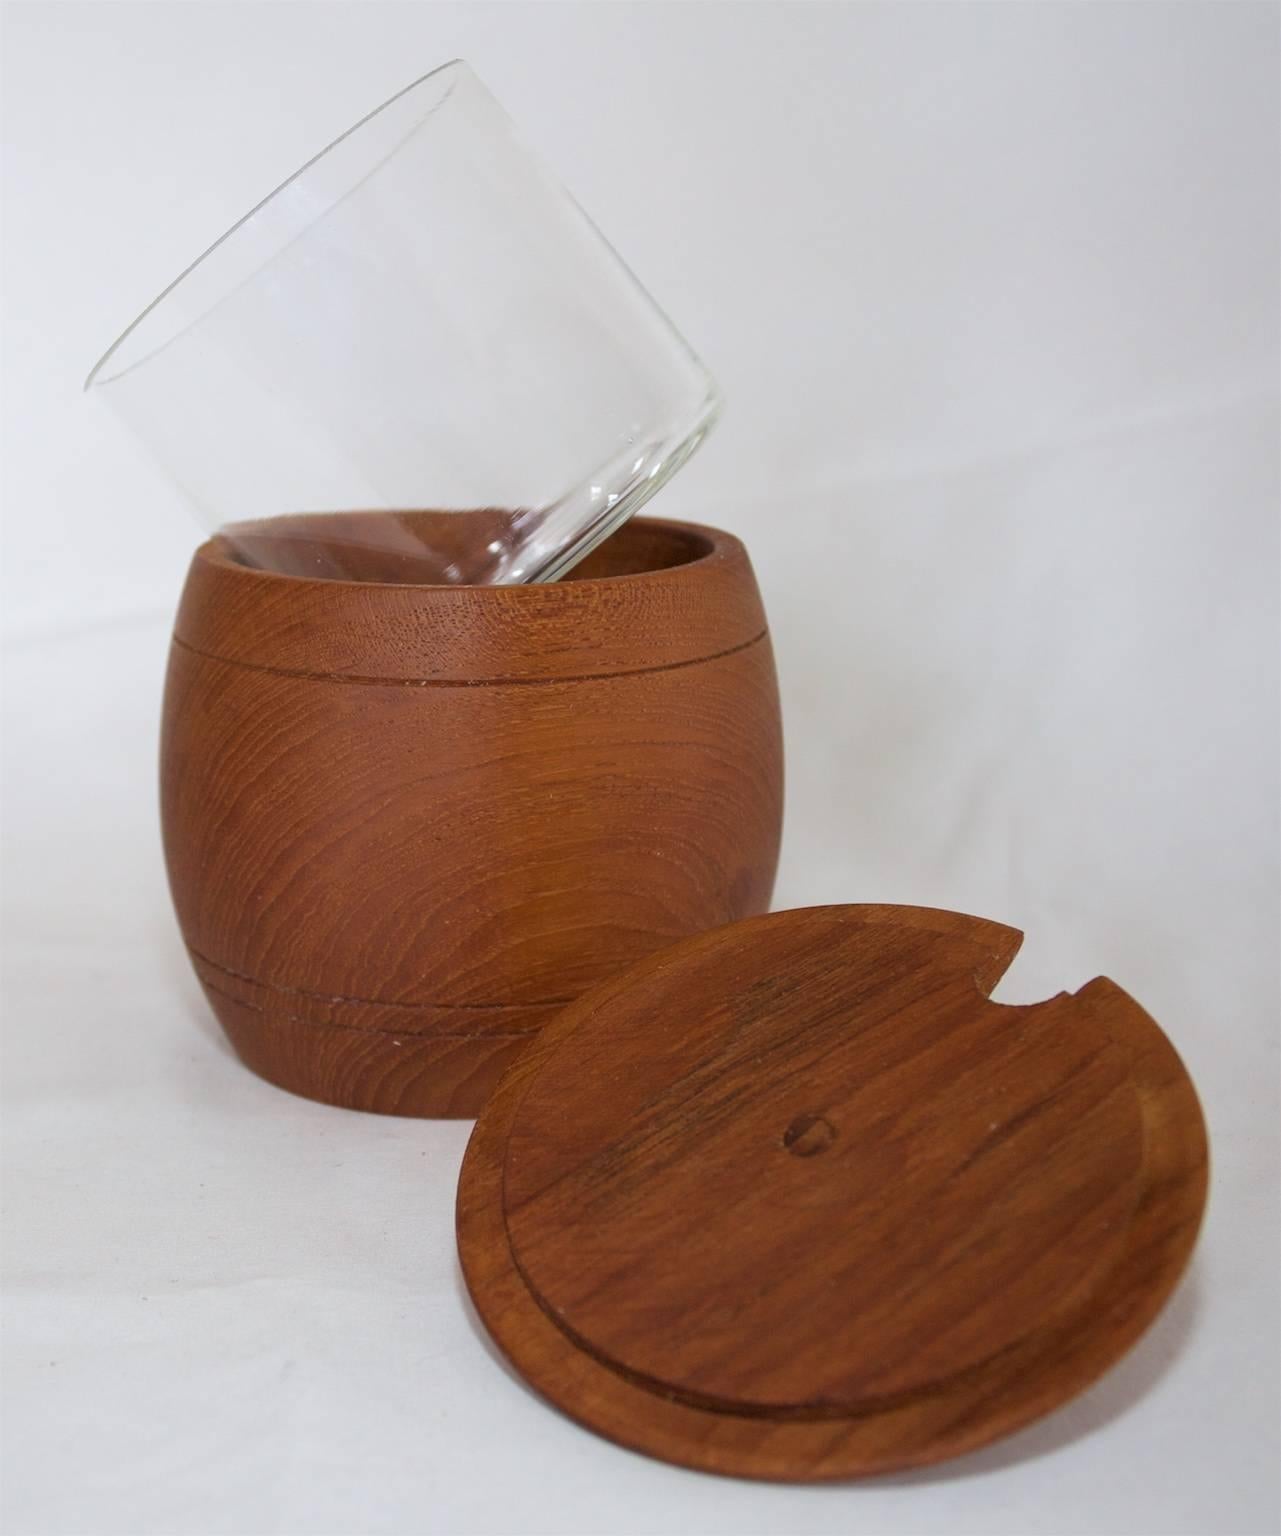 A very nice everyday ware, a Swedish teak jar with inner cup made of glass. Marked and produced by Ståko. - Stålkompaniet, 1960s-1970s. The inner glass cup is very practical and can be removed to be cleaned of its content. The lid has a cut-out